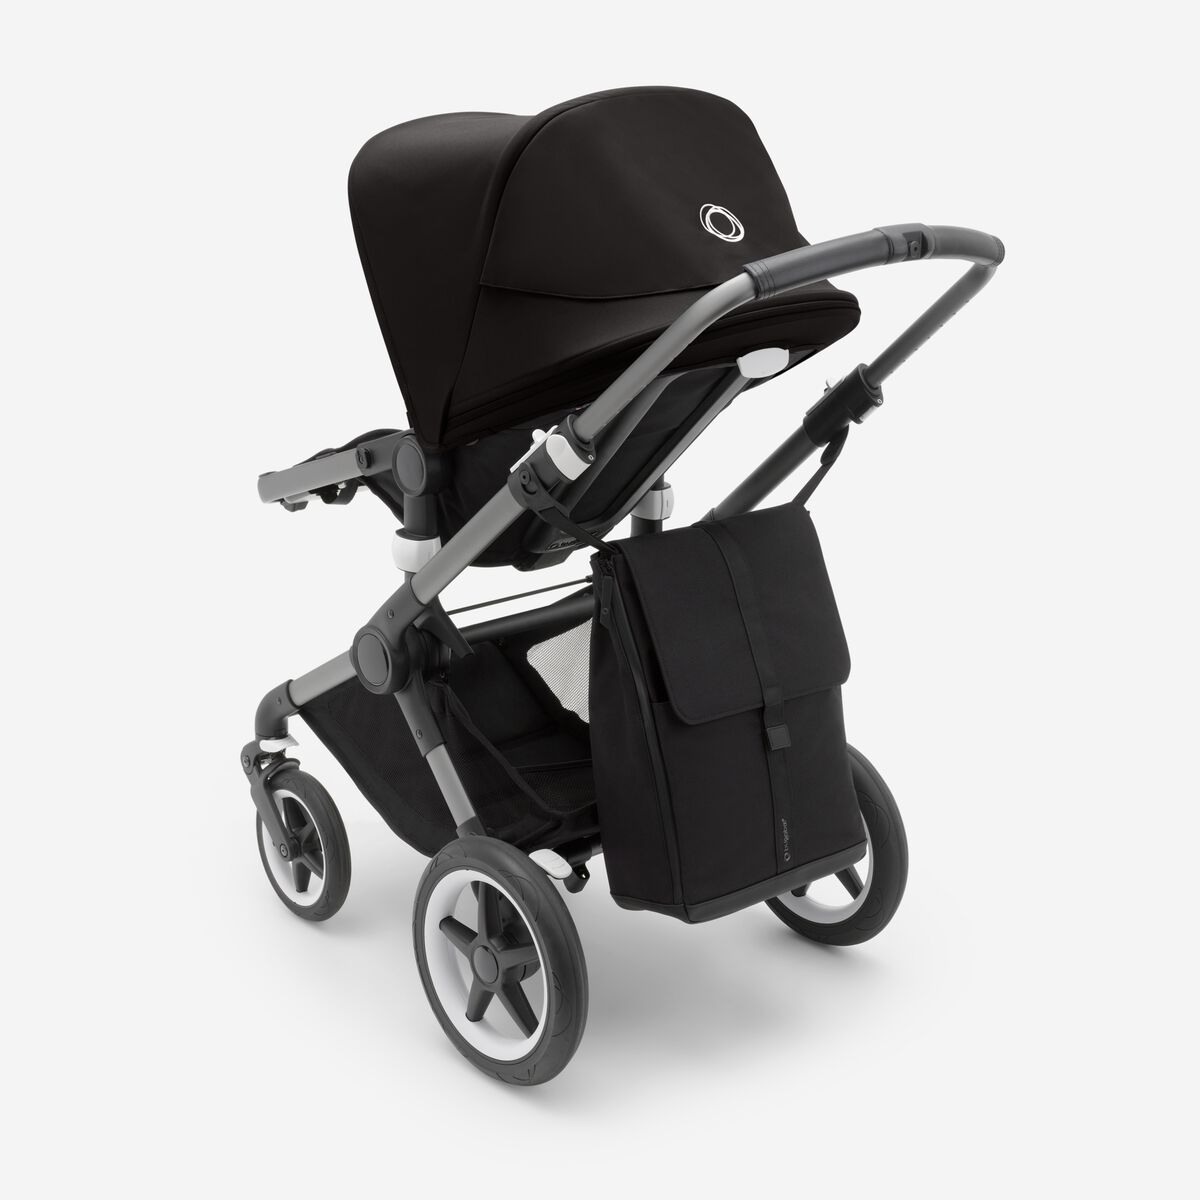 Bugaboo wheel bag for comfort transport bag - Tiny Tots Baby Store 